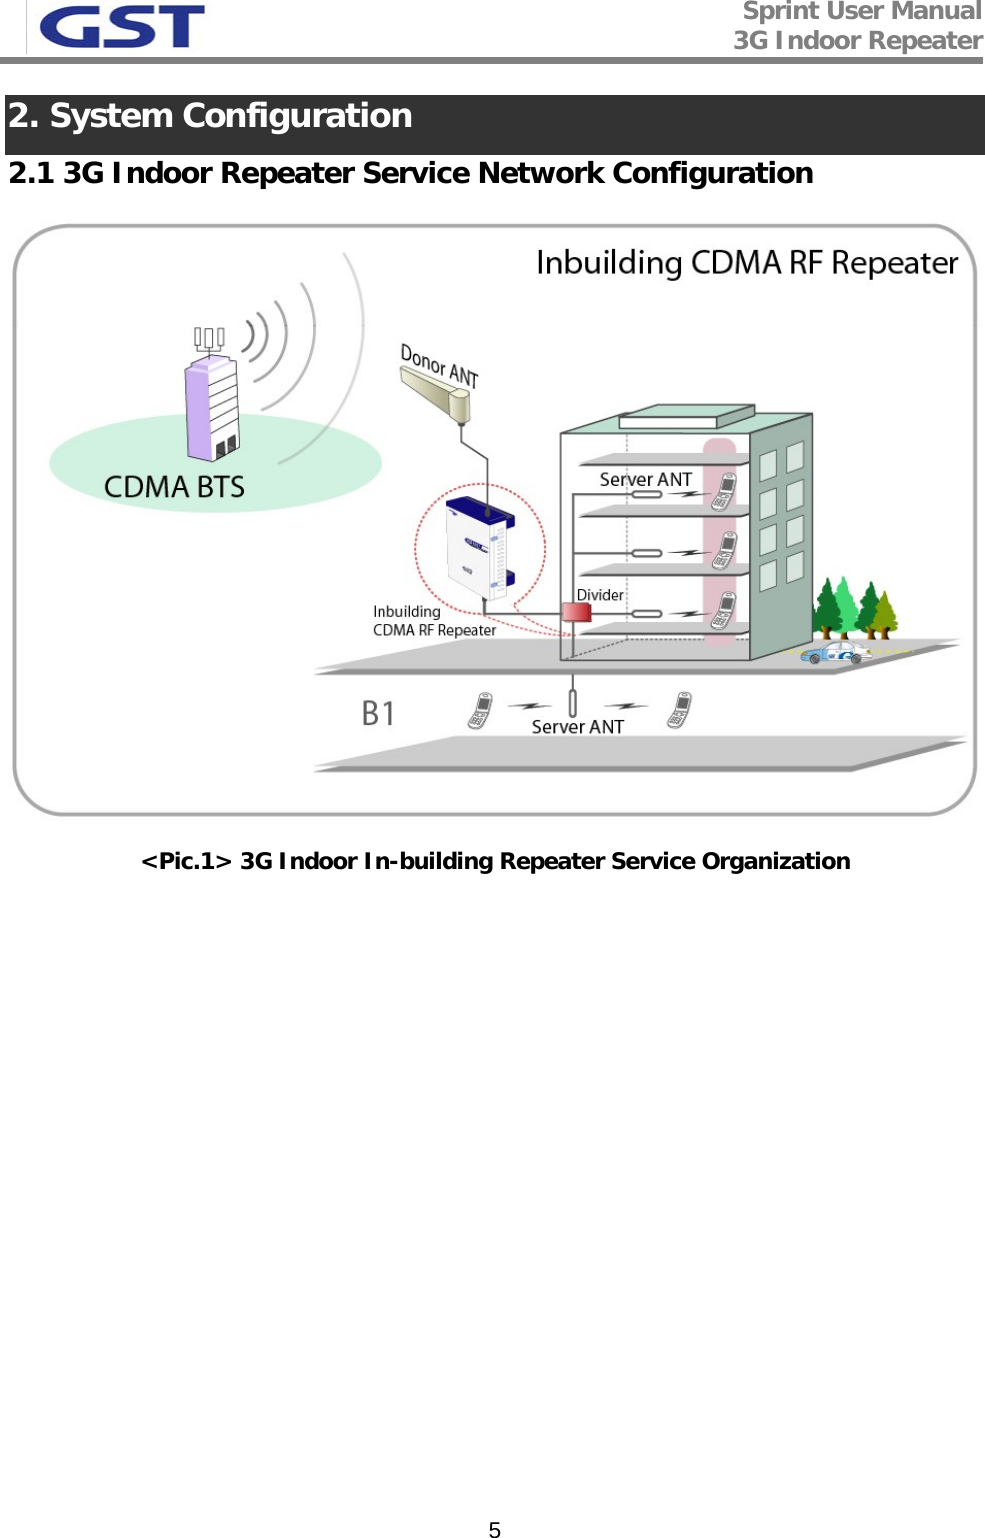 Sprint User Manual 3G Indoor Repeater   52. System Configuration 2.1 3G Indoor Repeater Service Network Configuration  &lt;Pic.1&gt; 3G Indoor In-building Repeater Service Organization             